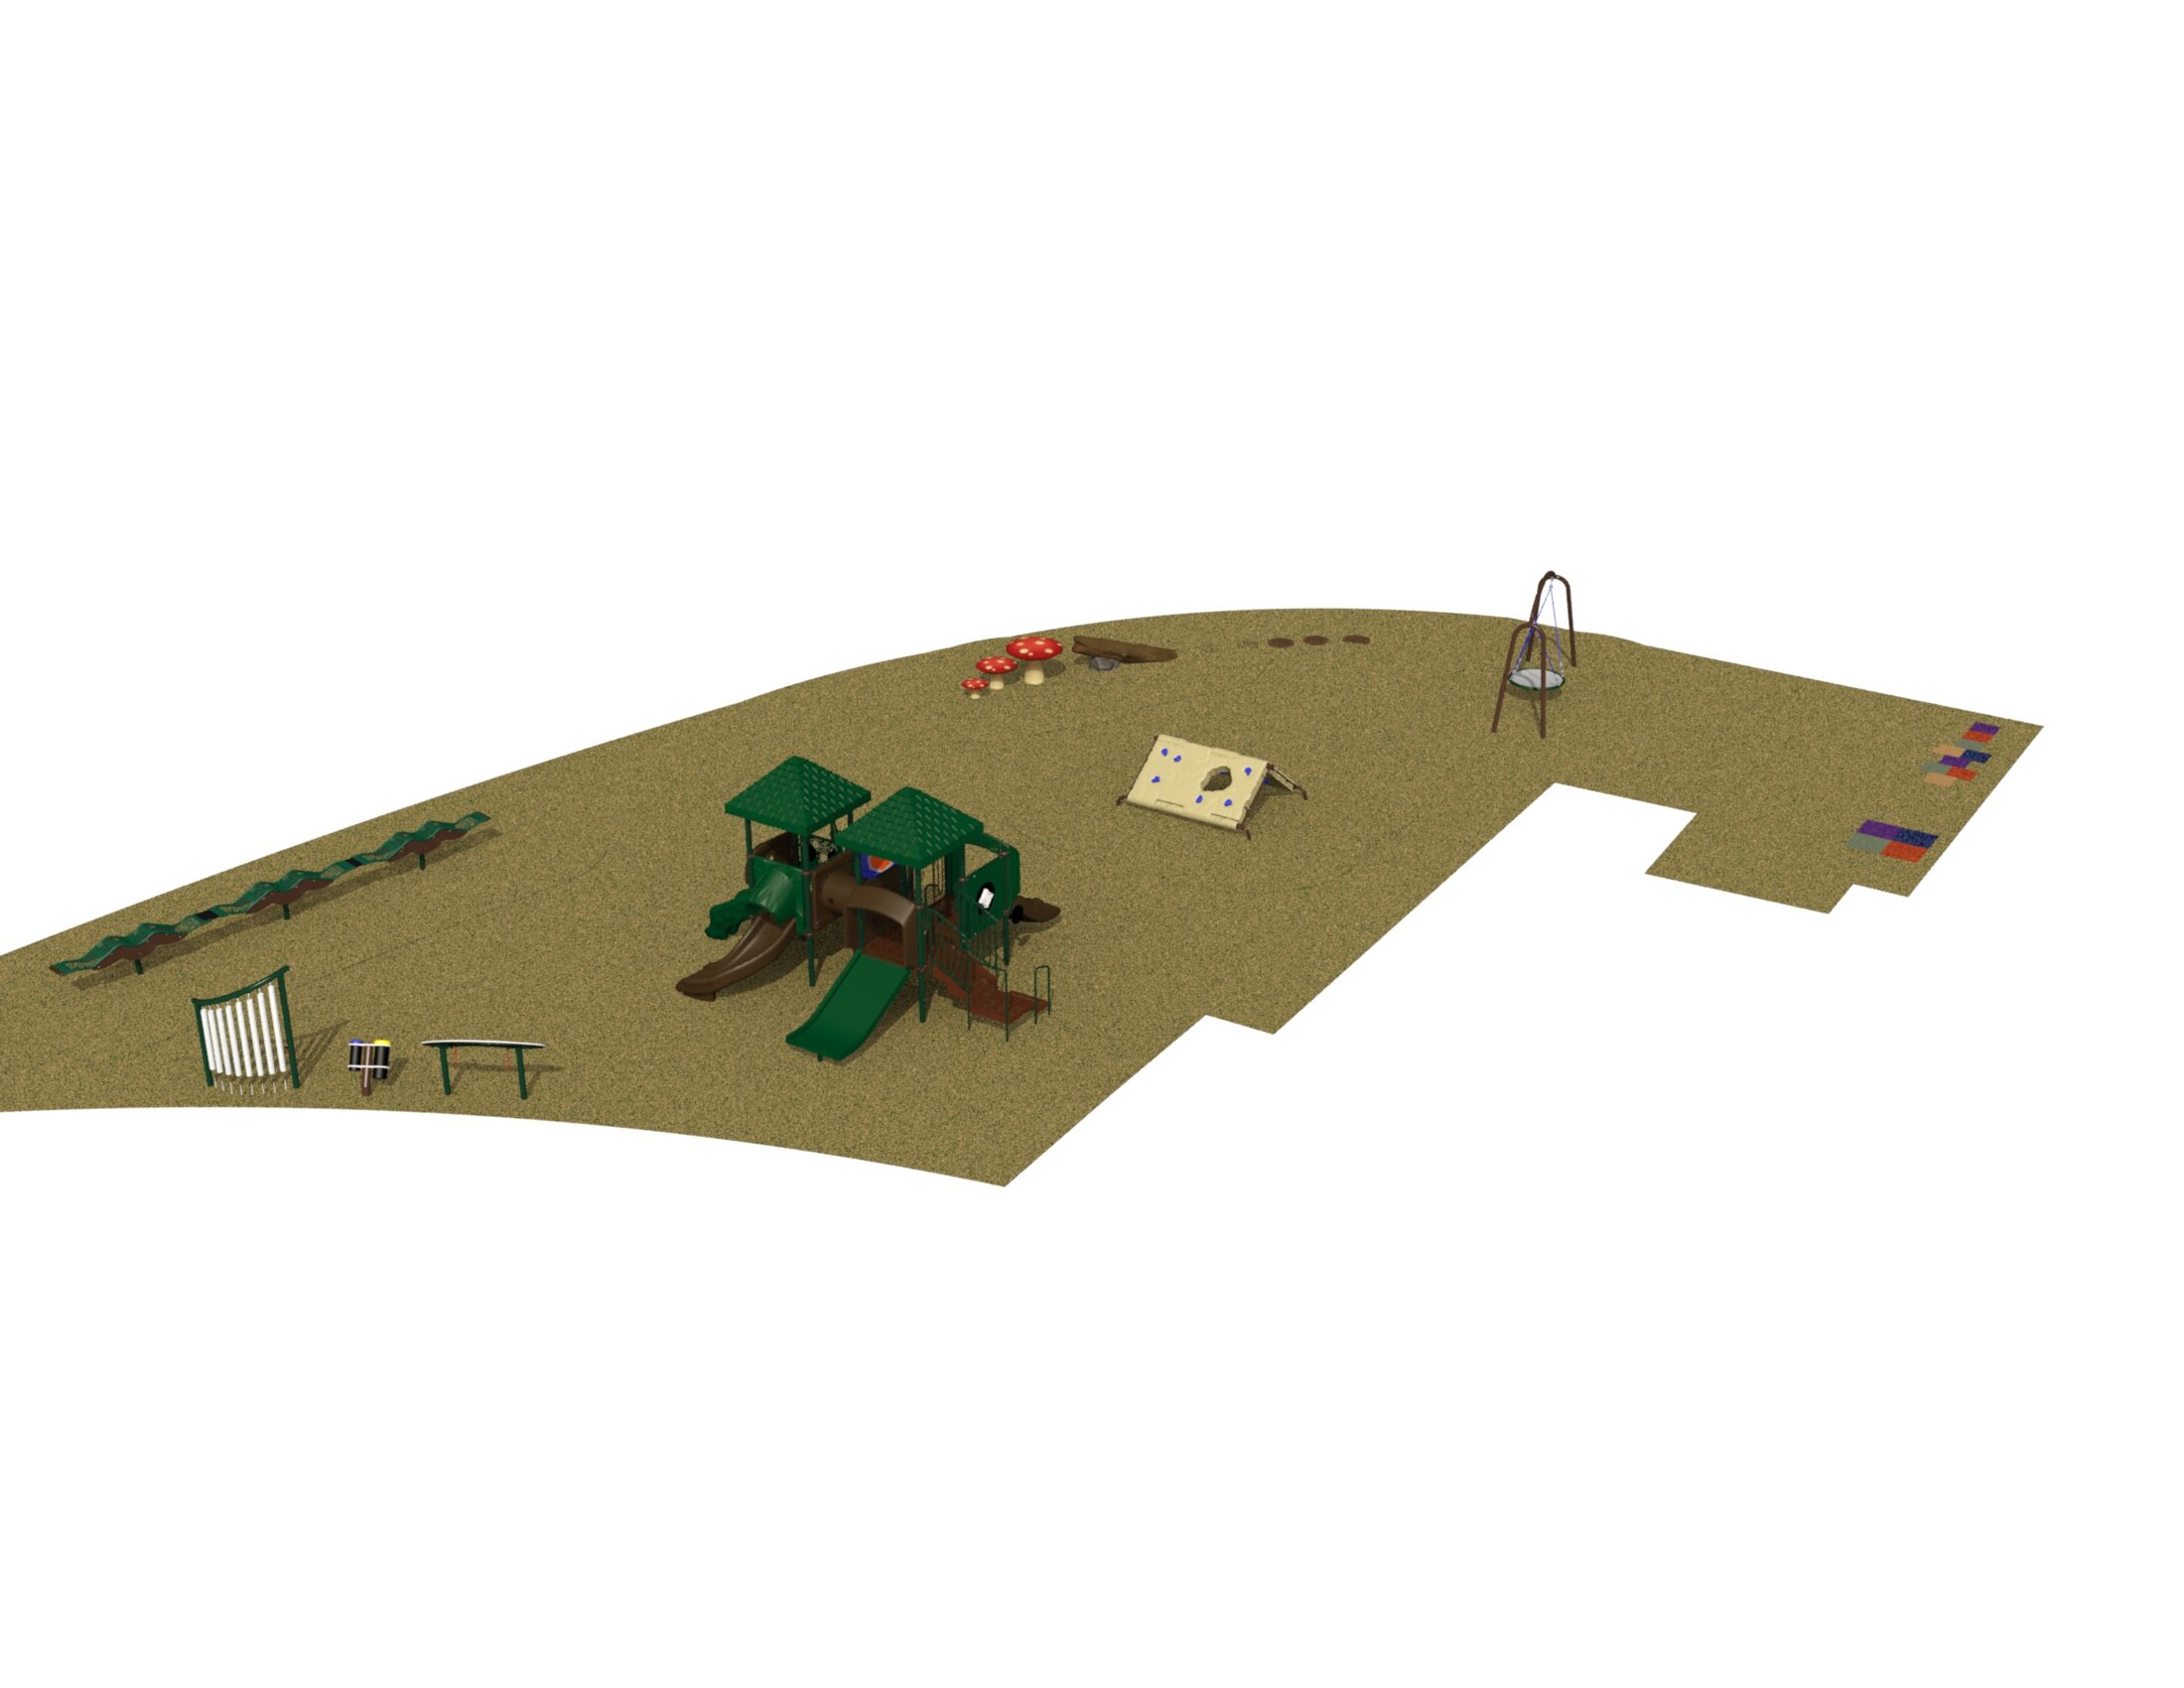 Rendering of the small playground structure